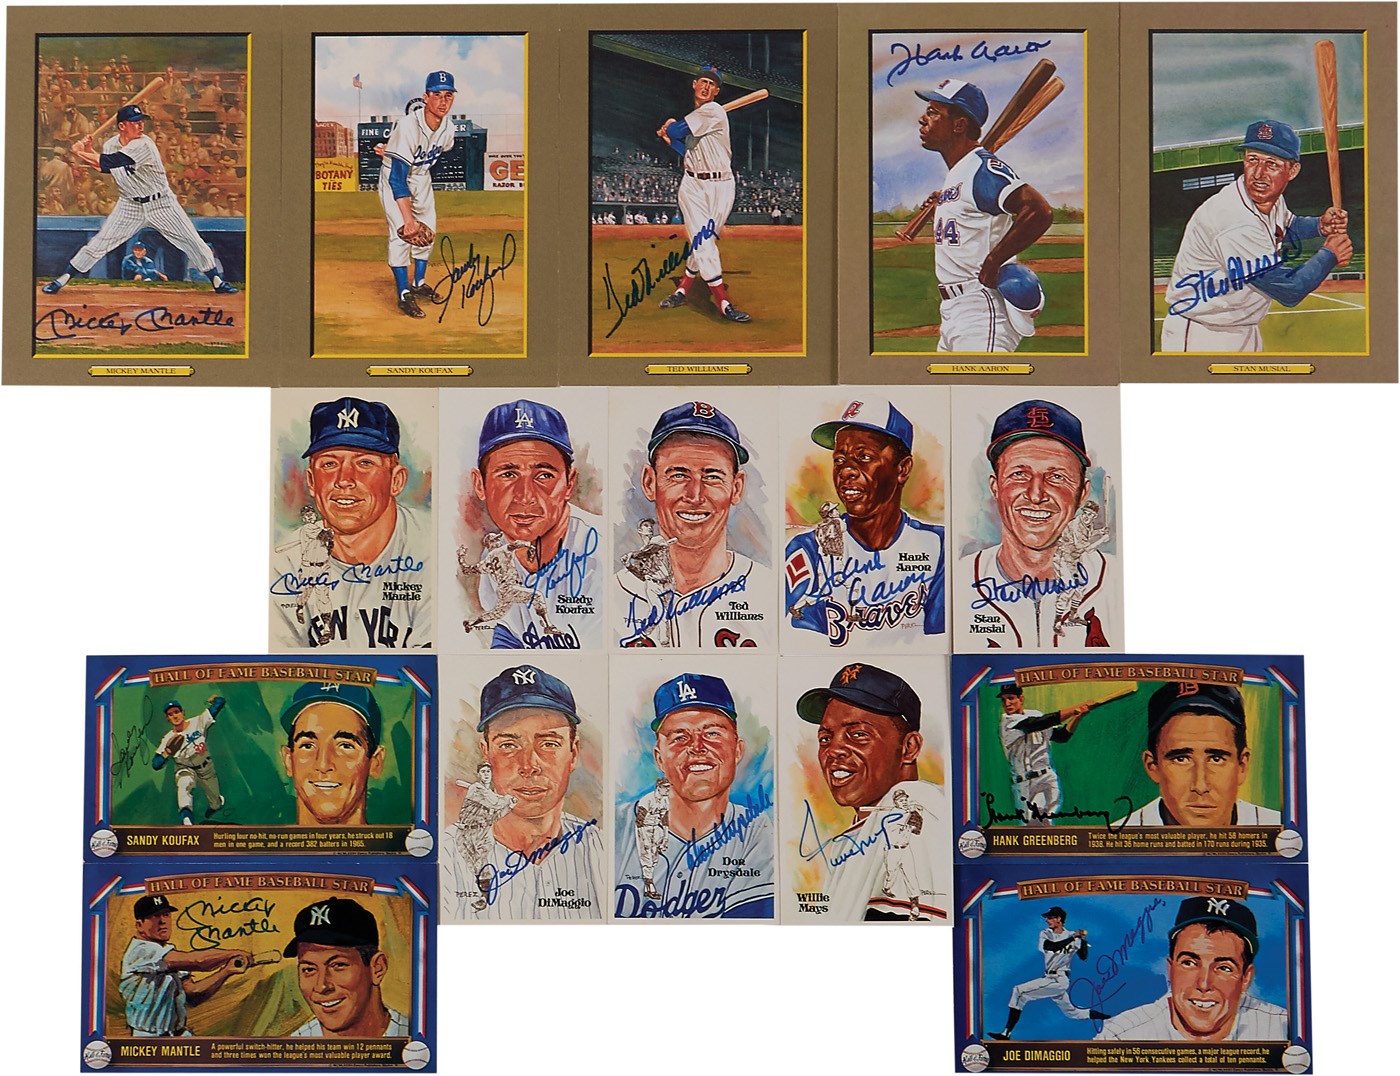 Baseball Autographs - 1980-2001 Perez-Steele Hall of Fame Postcard and Great Moments Complete Sets (7) with 244 Signed HOFer Cards